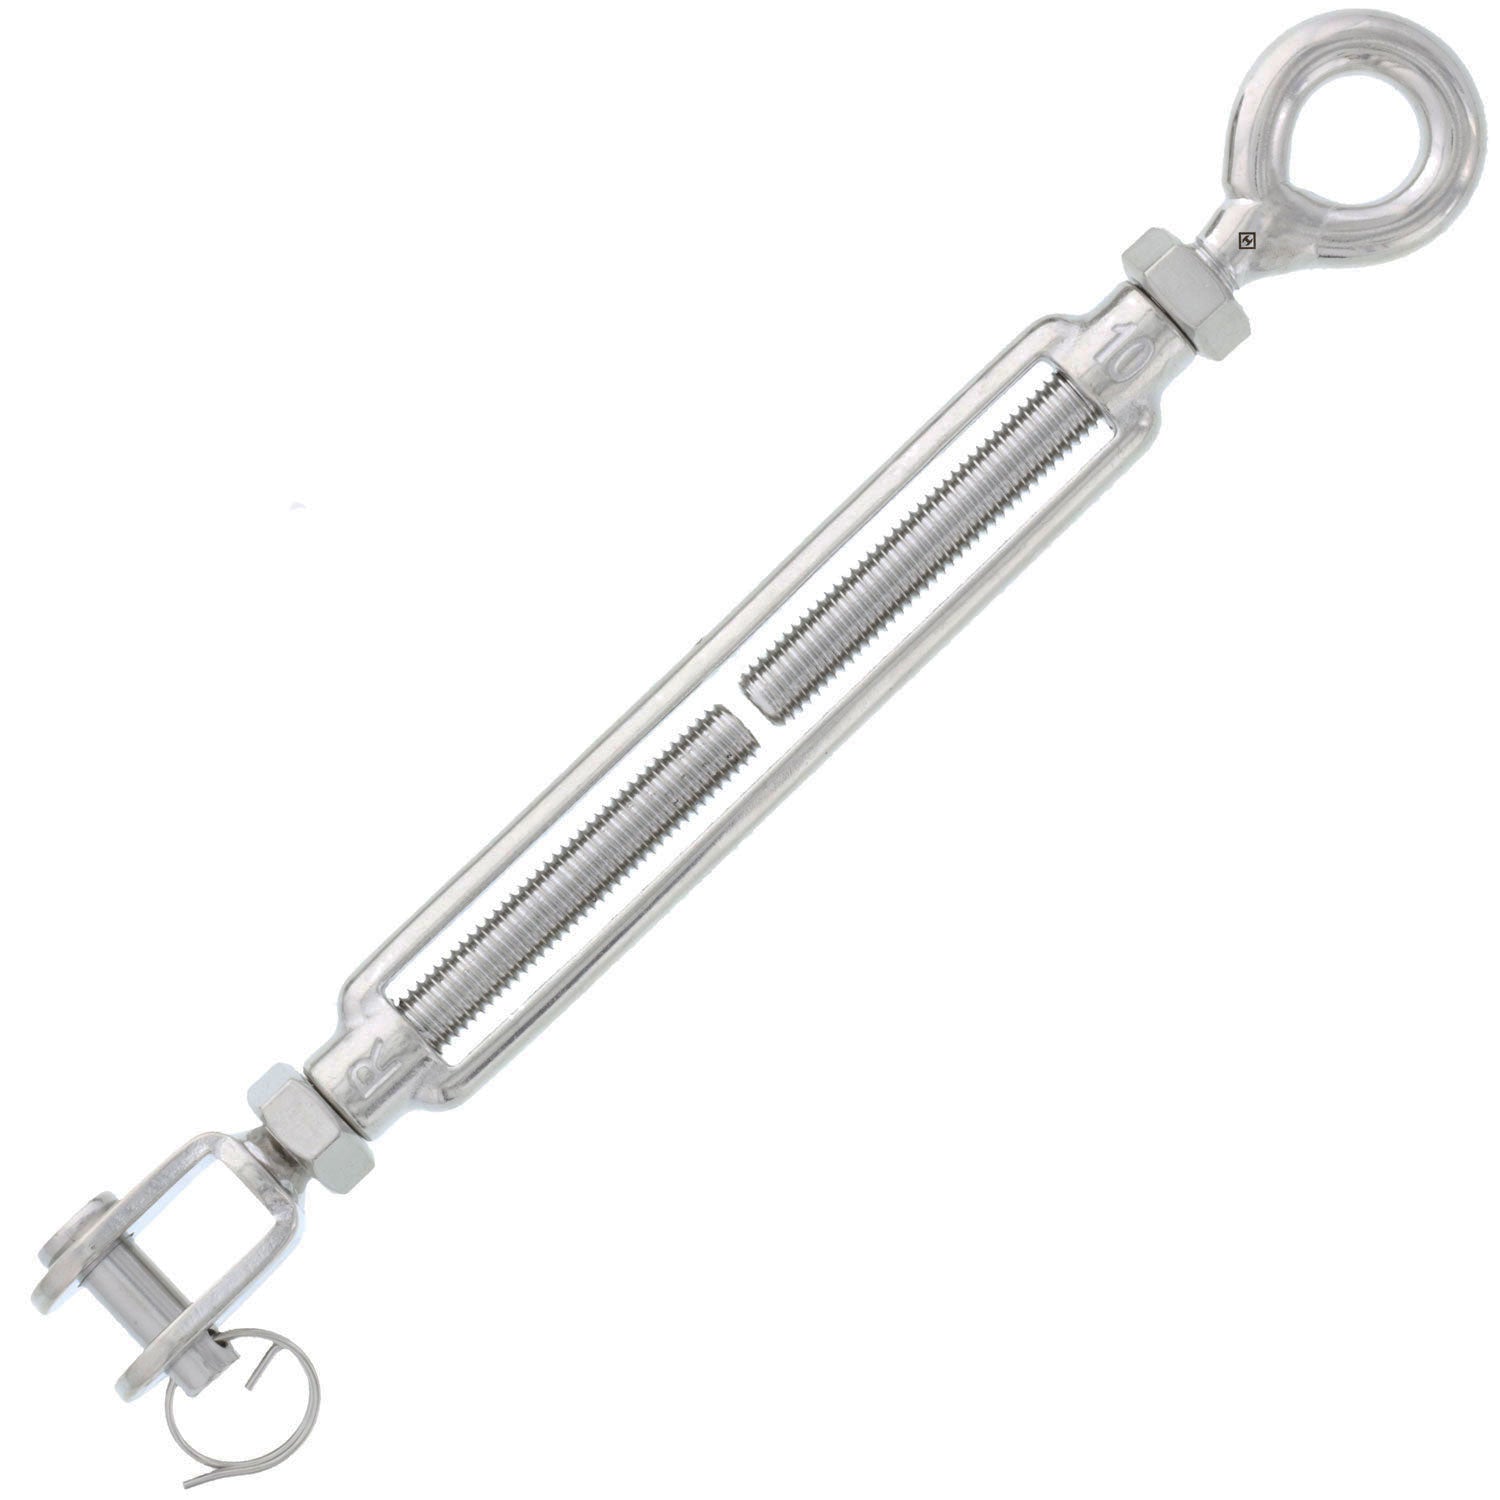 Type 316 Stainless Steel Jaw Turnbuckle with Closed Body 3/8" Jaw 